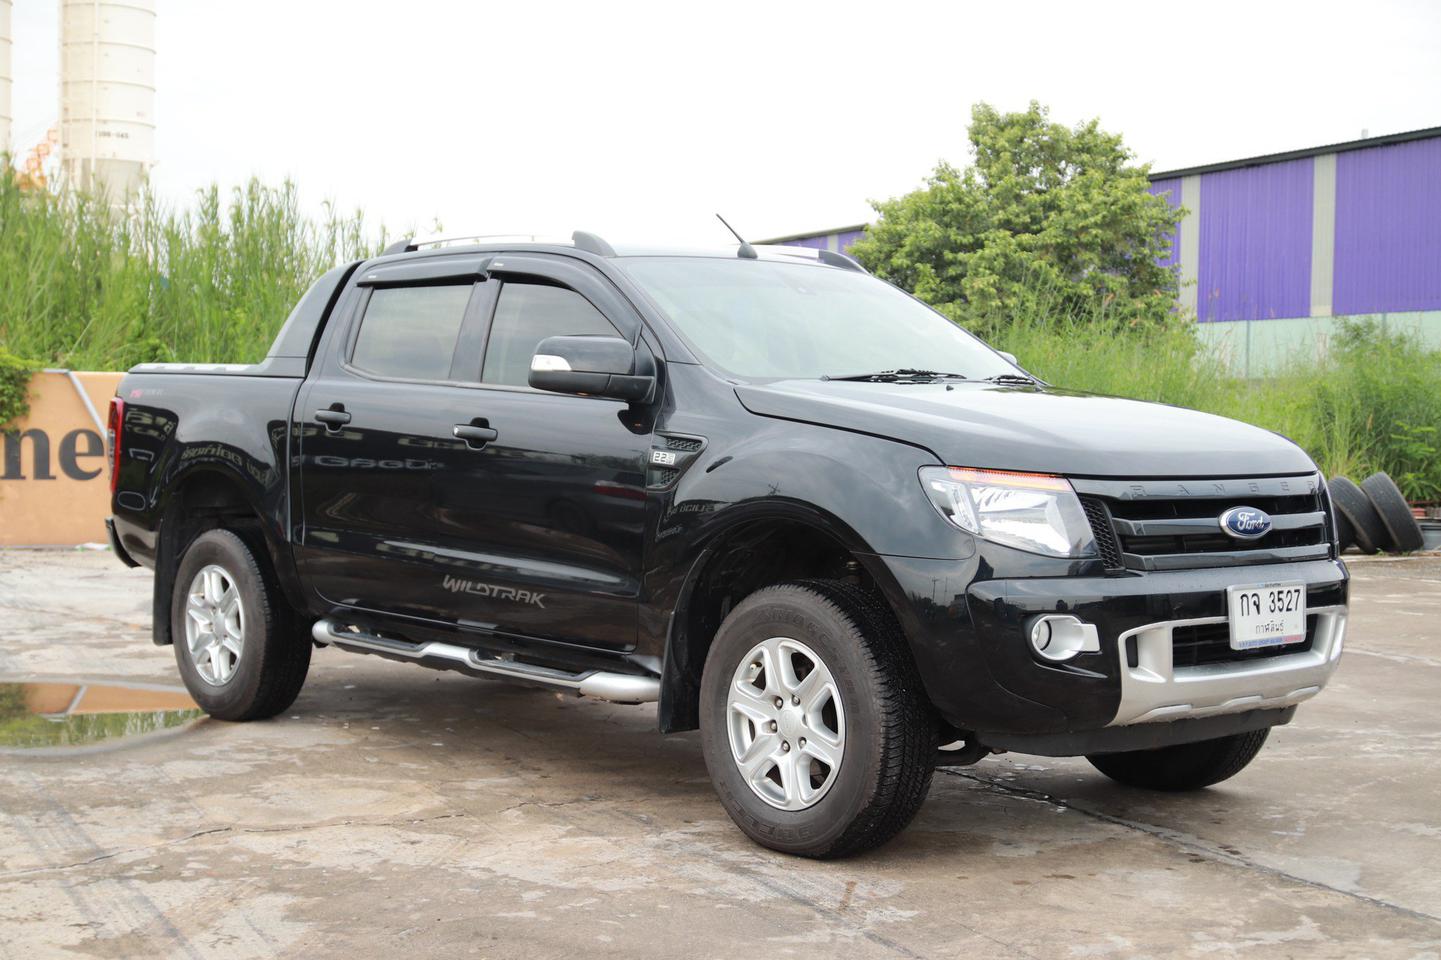 FORD RANGER DOUBLE CAB 2.2 XLT WILDTRACK HIRIDER ปี 2013